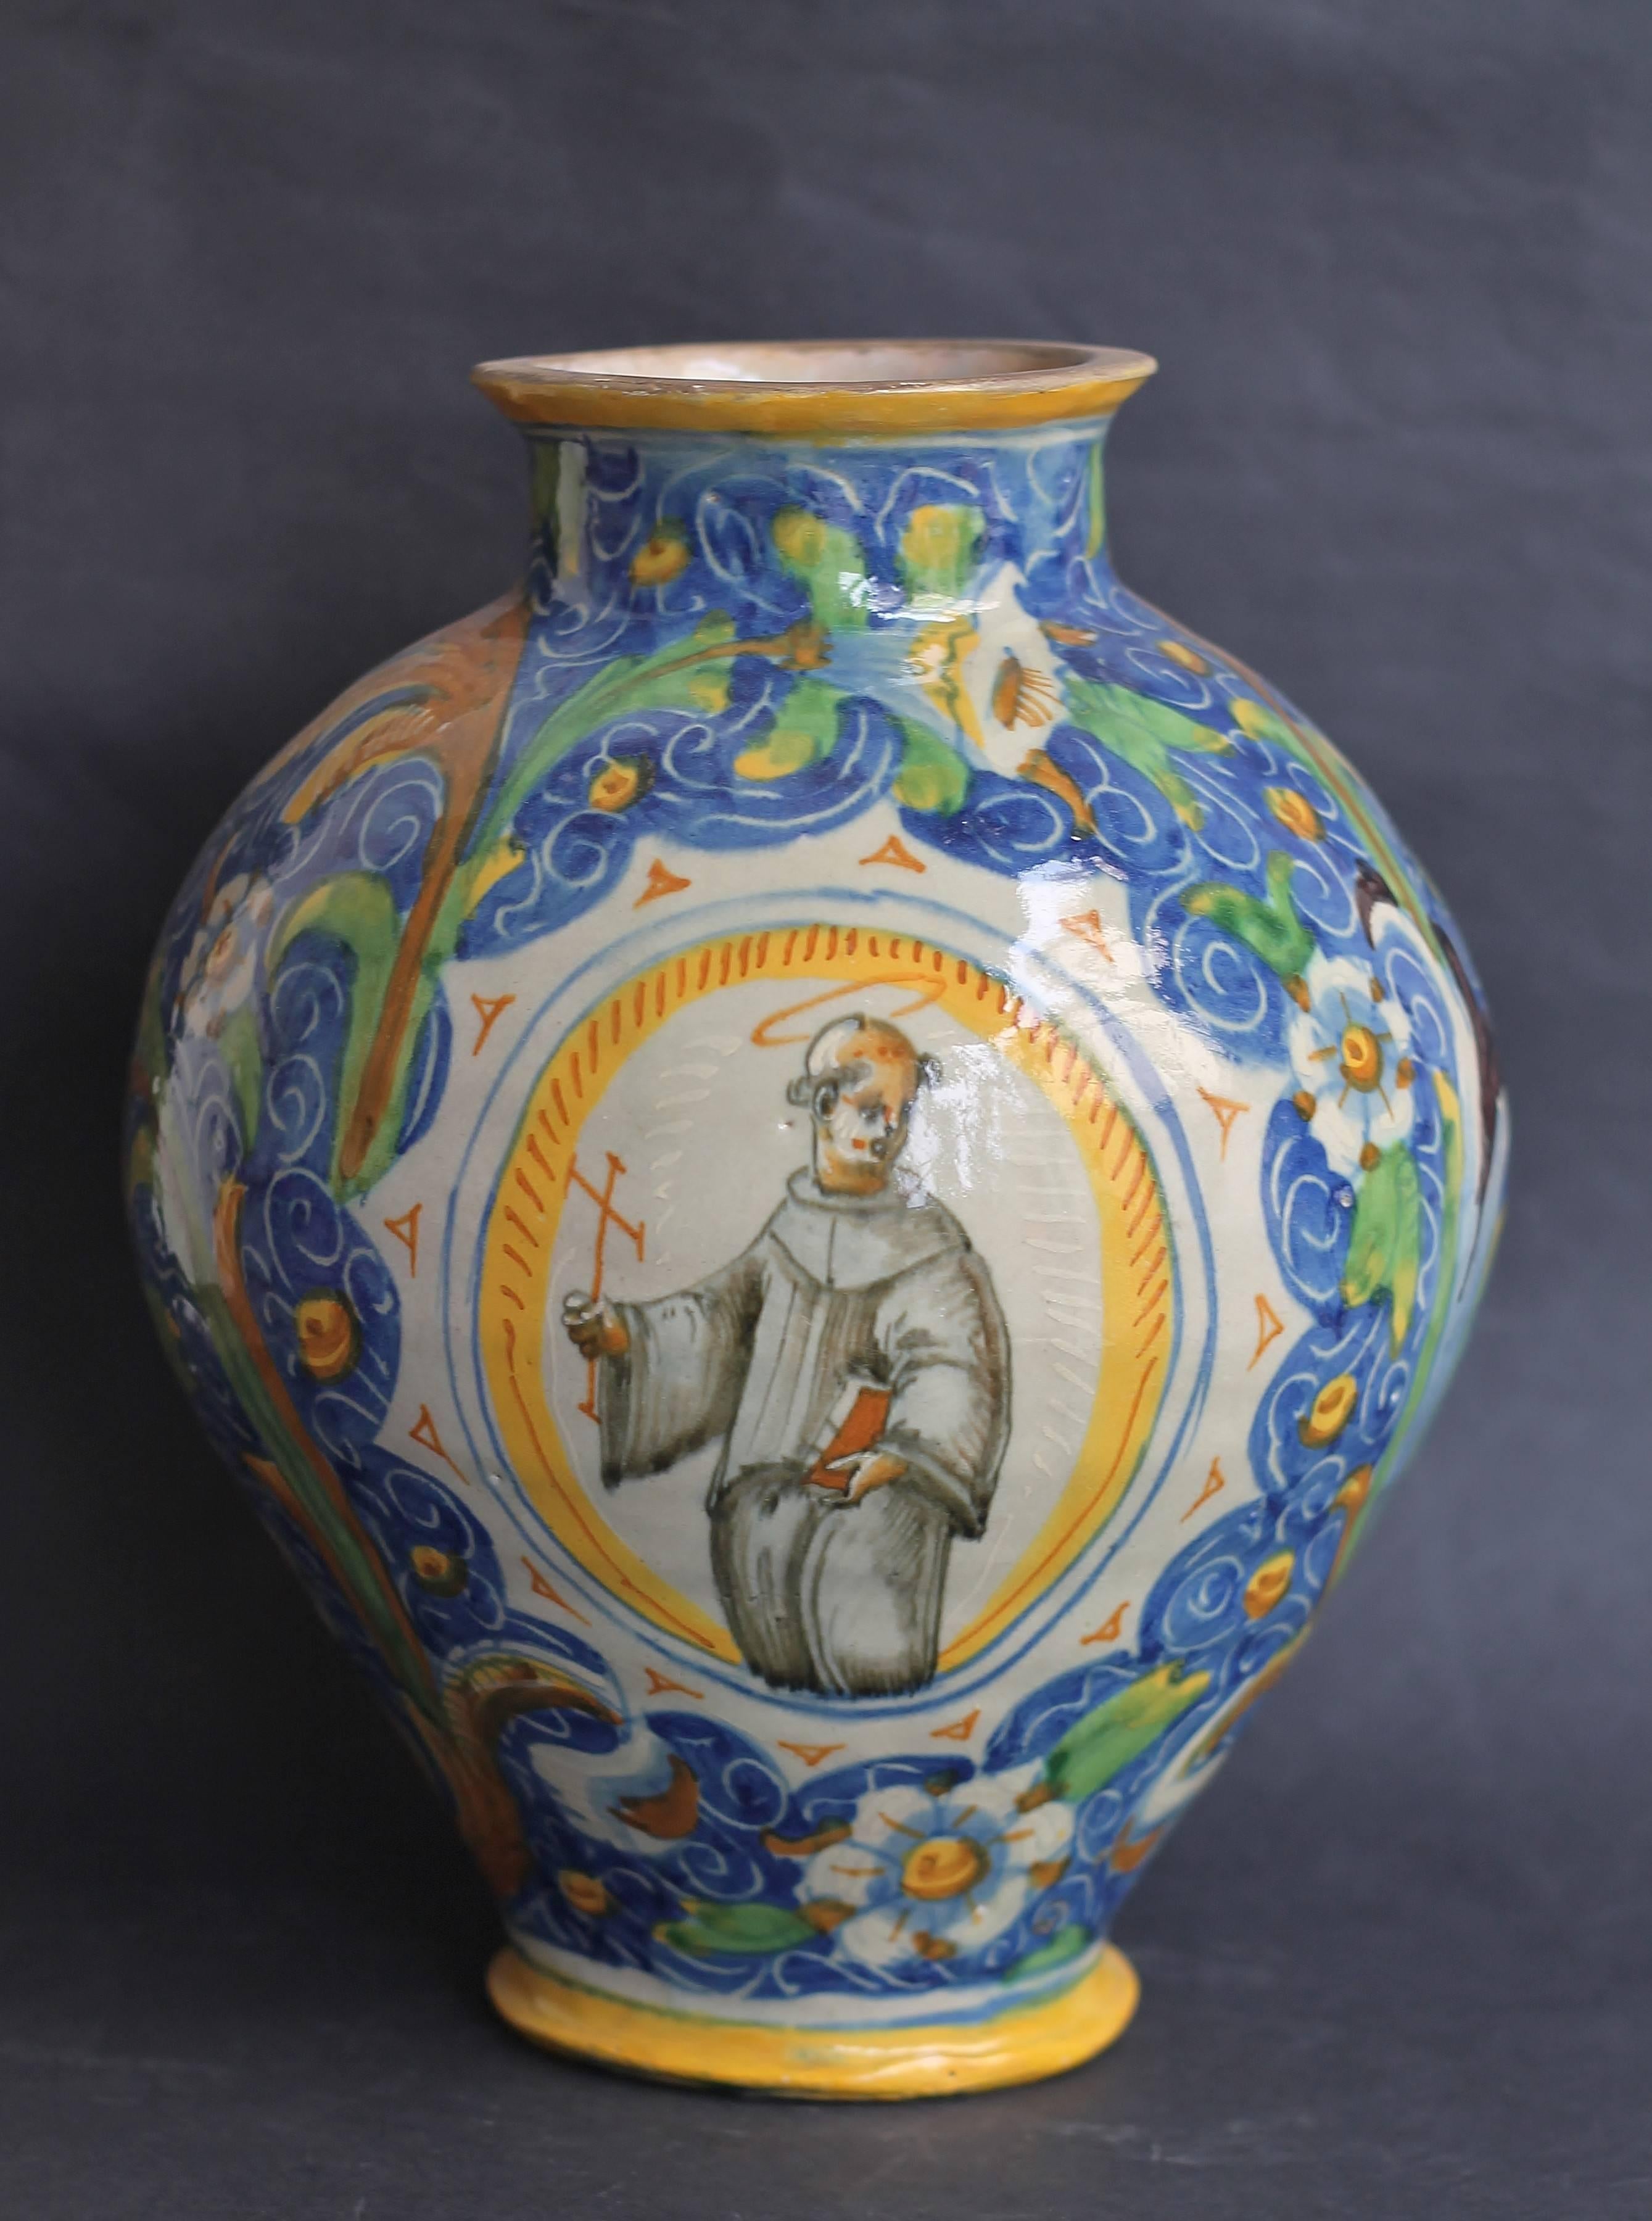 Ovoid vase in Majolica with polychrome decoration the broad rinceaux one flowered on blue bottom and of an oval cartouche representing Saint François with the bible in the left hand and a cross in the right hand, the “perfect Christian”. It’s the